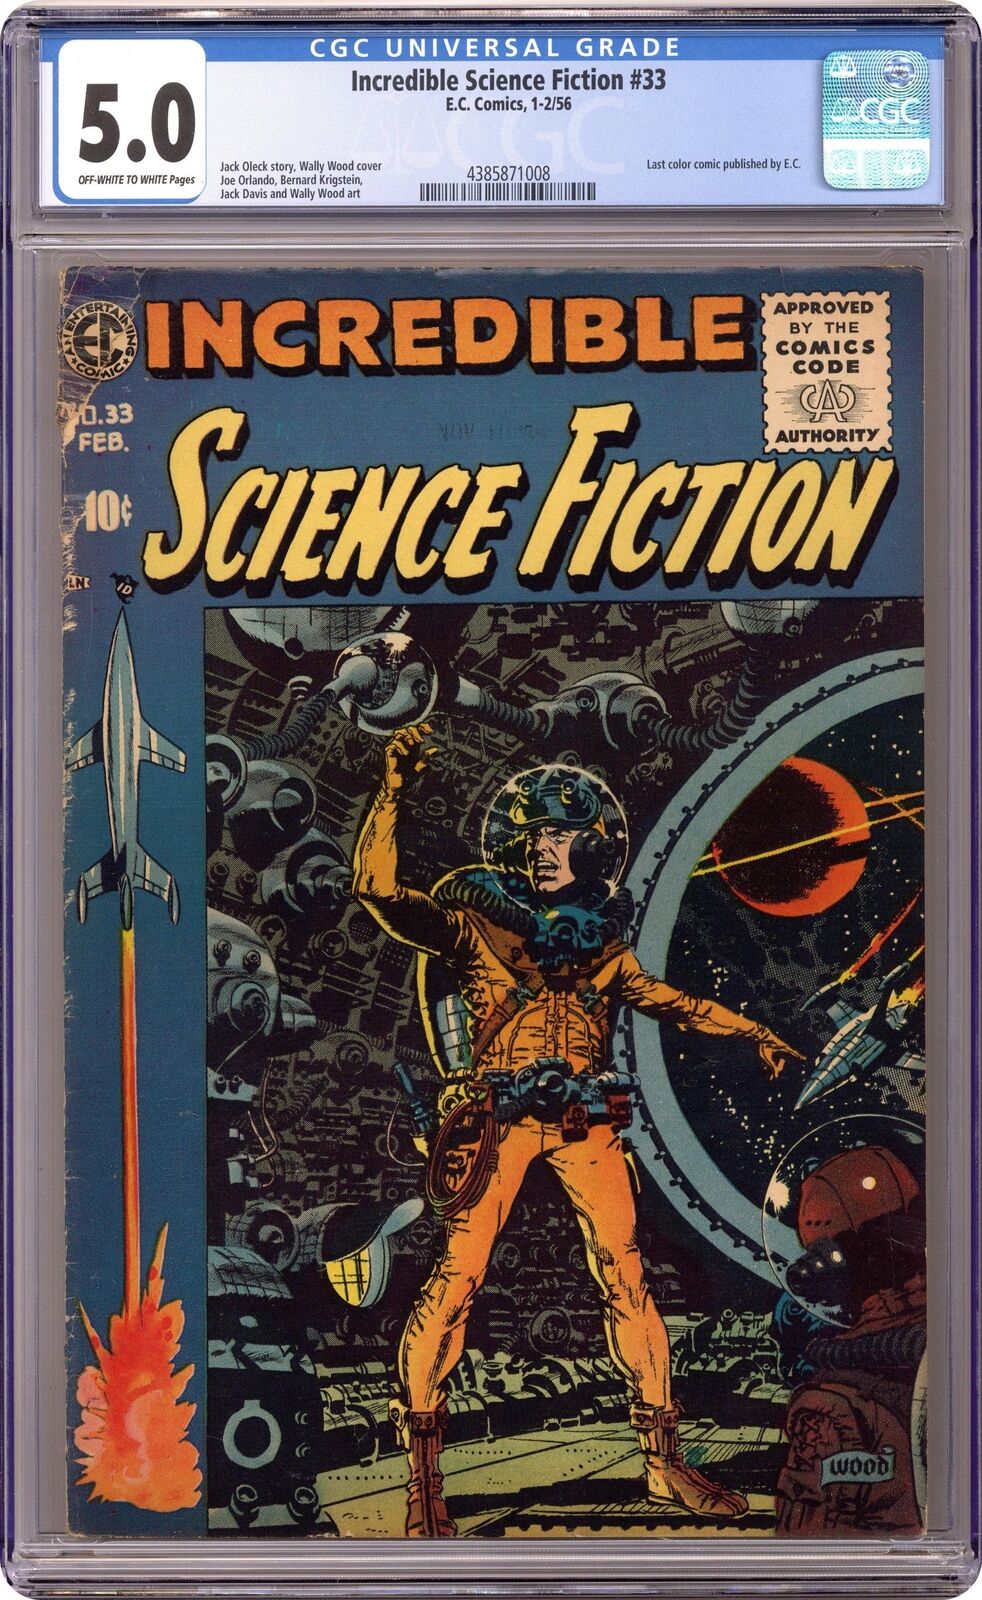 Incredible Science Fiction #33 CGC 5.0 1956 4385871008